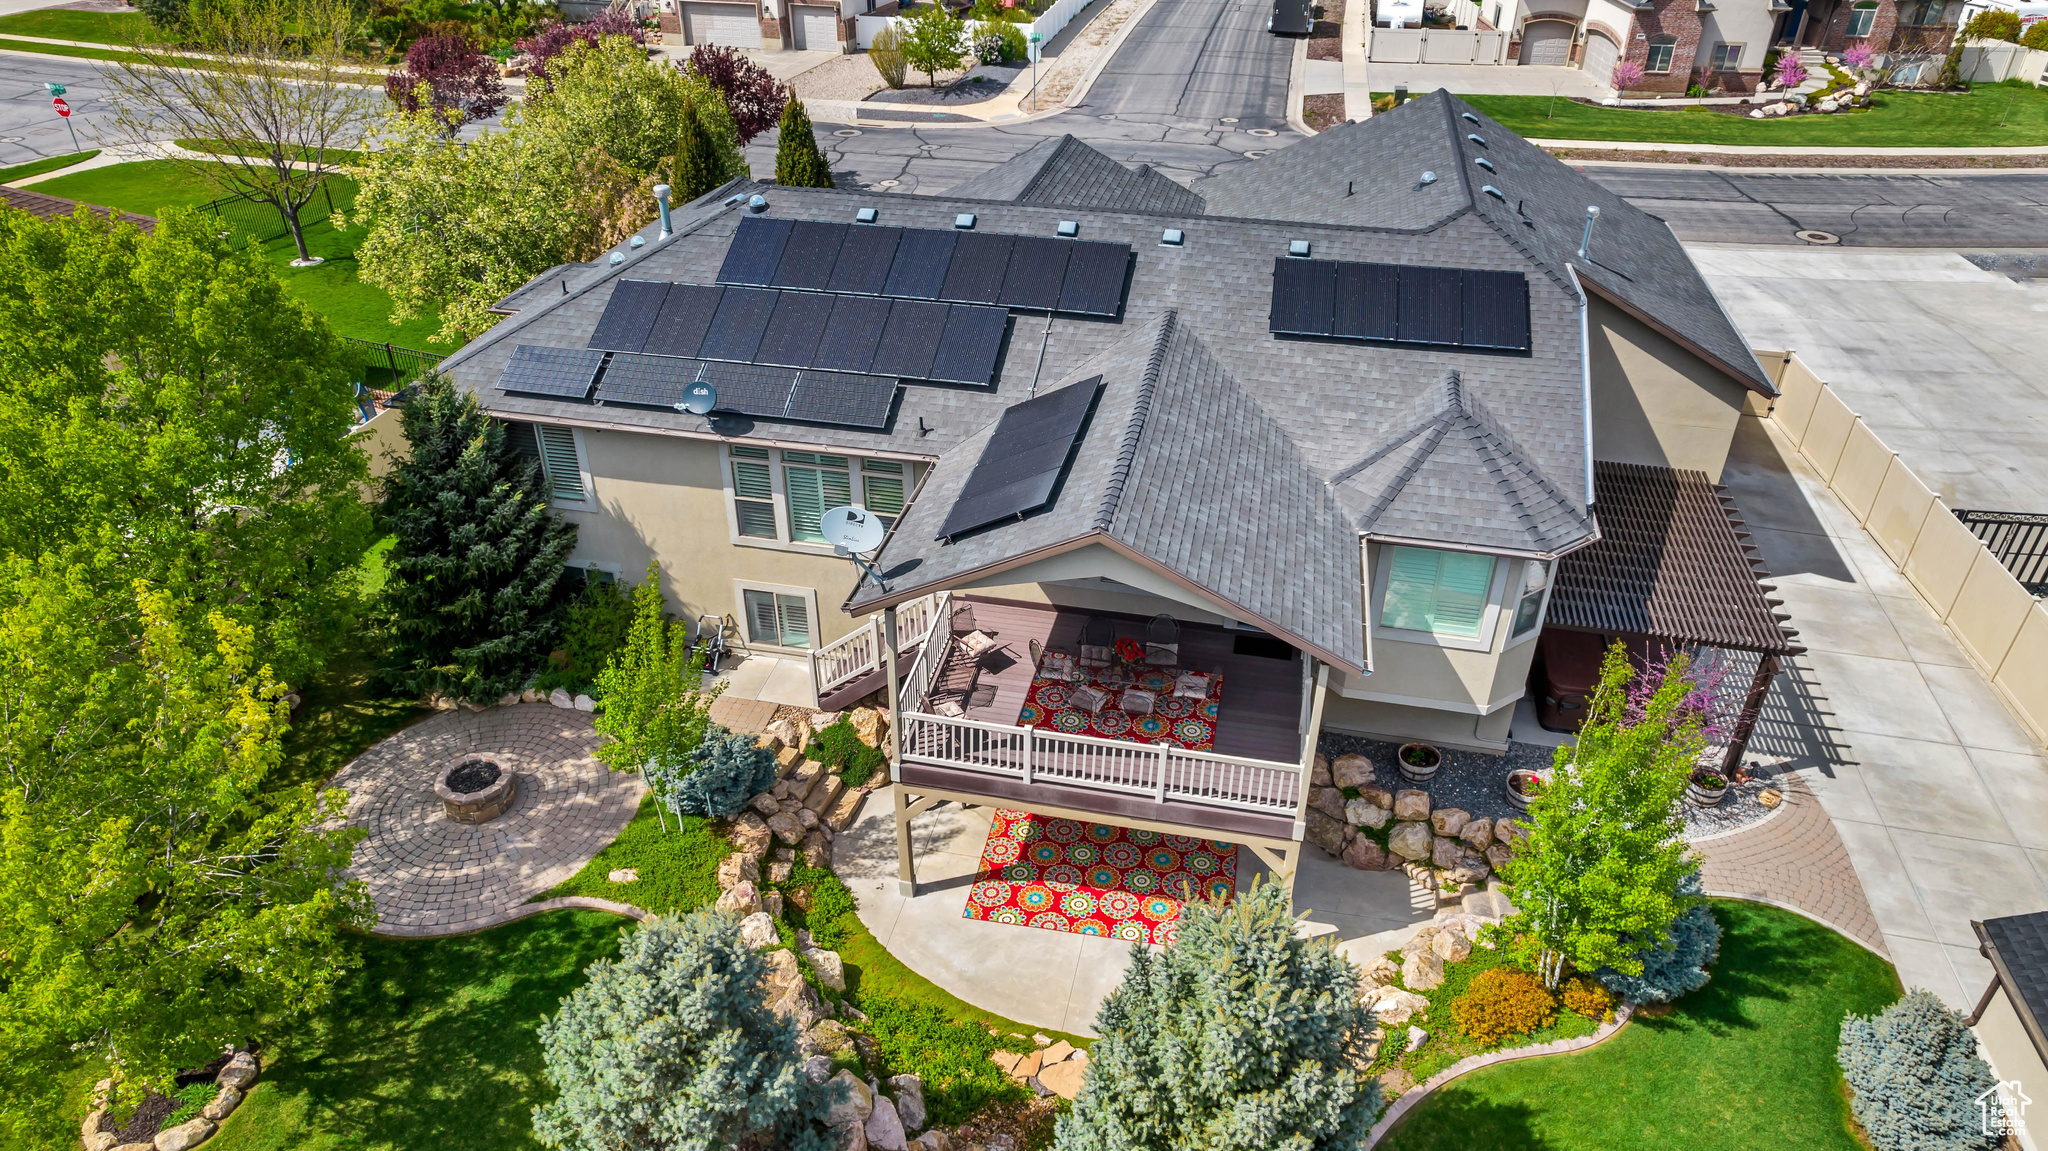 Bird's eye view from the back of the home and solar panels